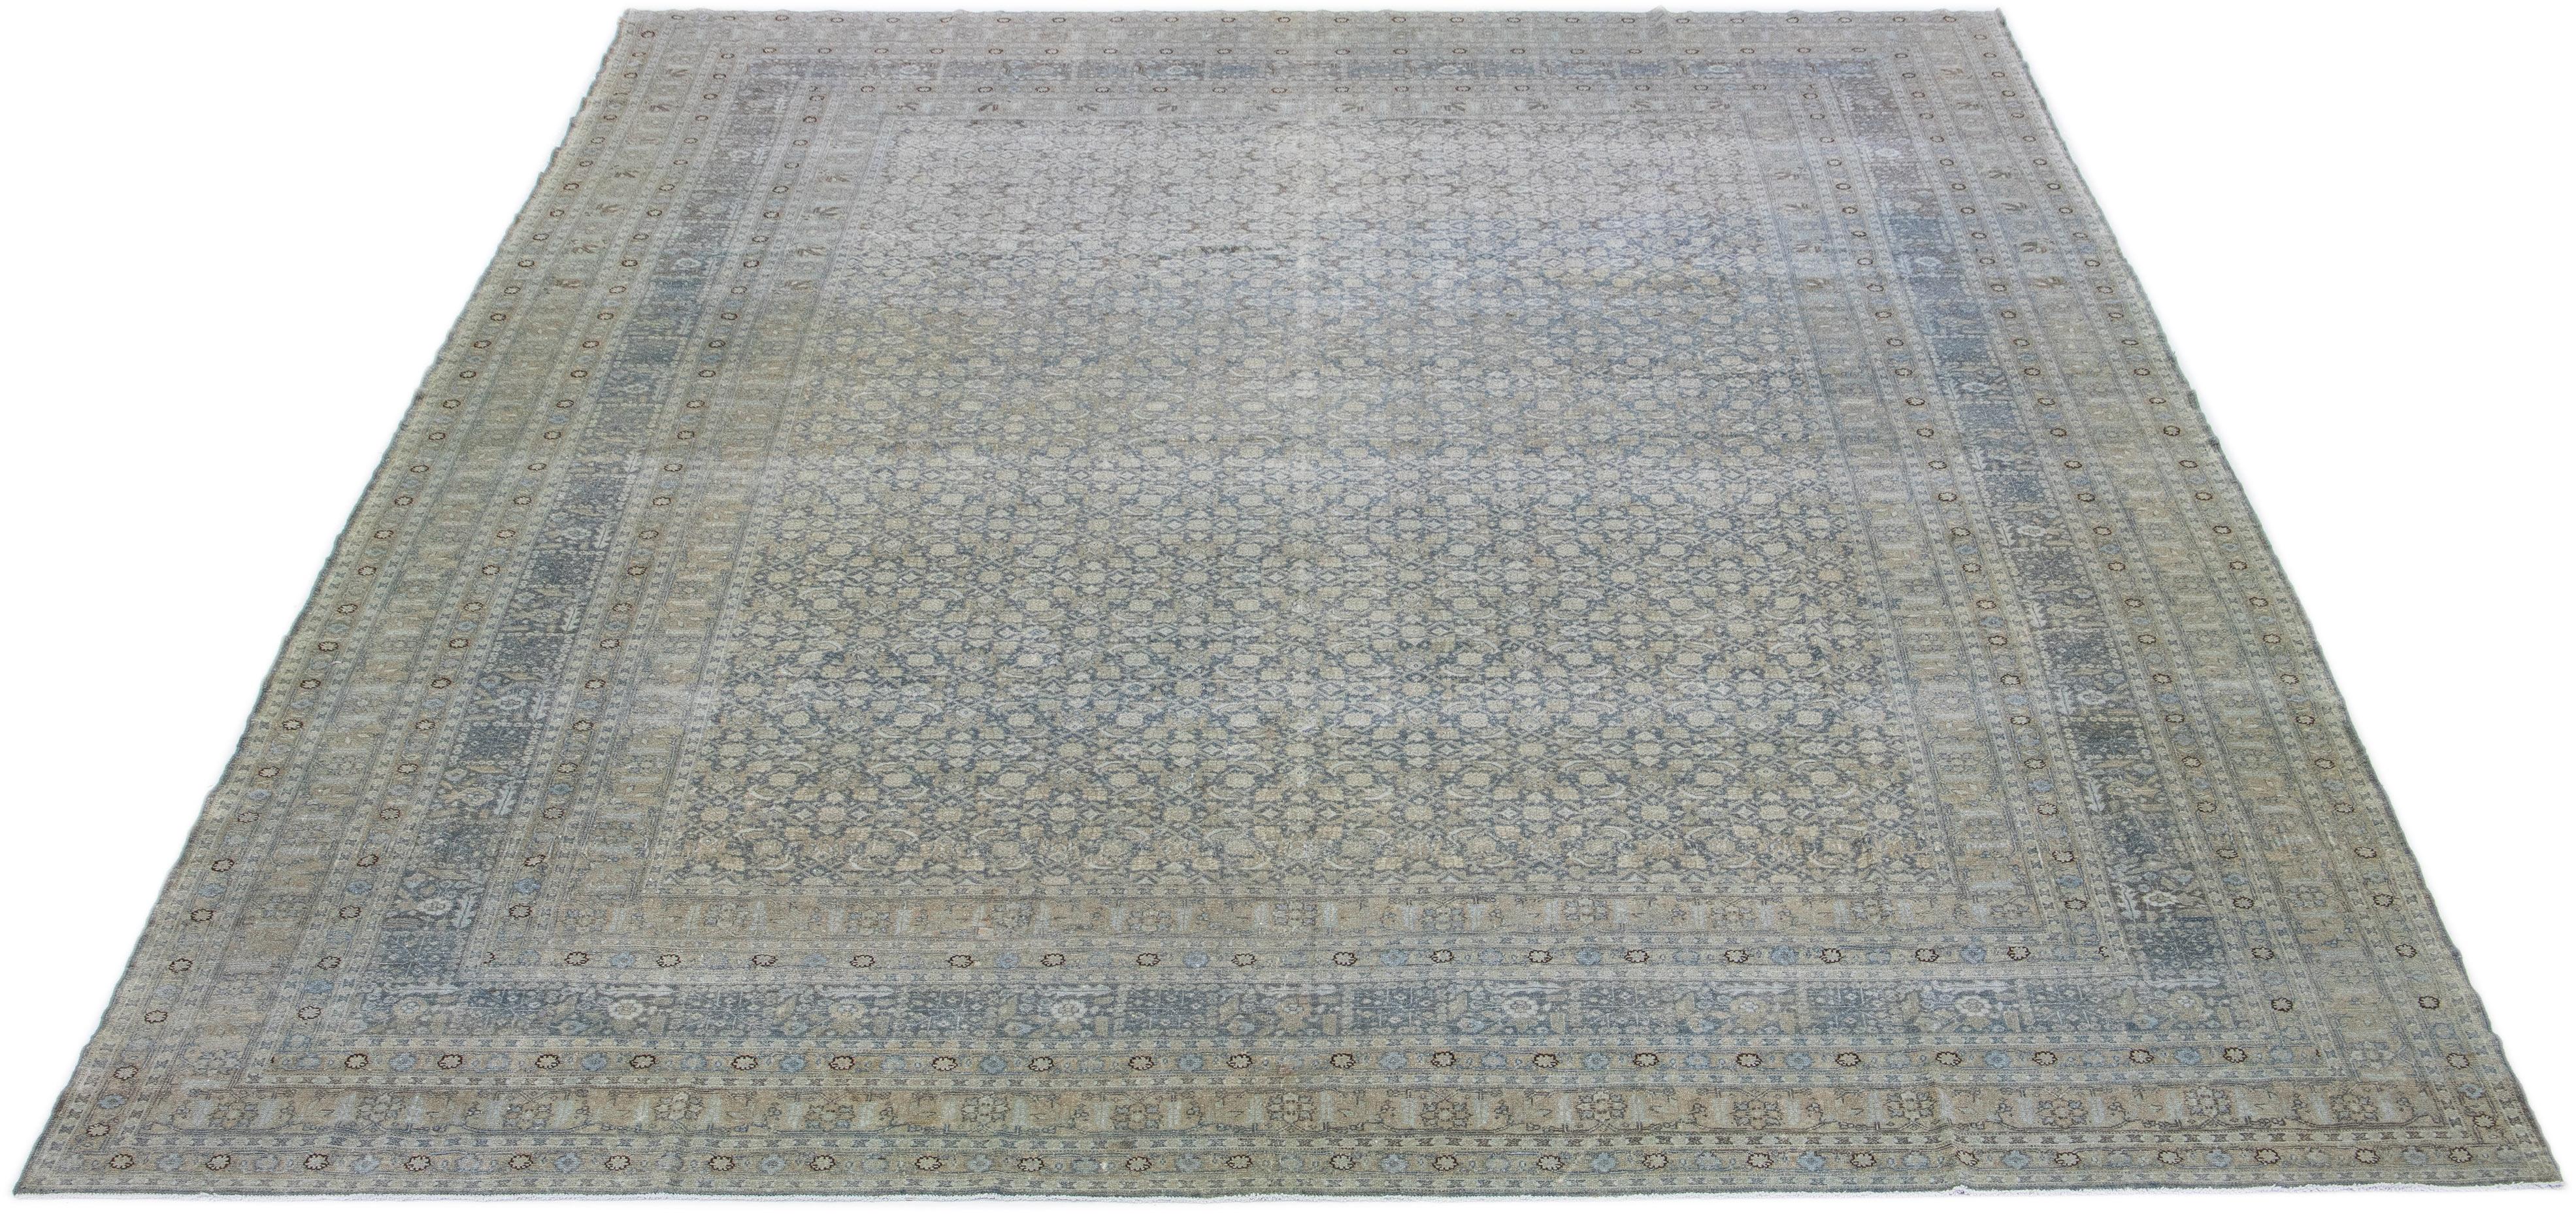 Gray Antique Persian Malayer Wool Rug Handmade with Allover Floral Pattern For Sale 1